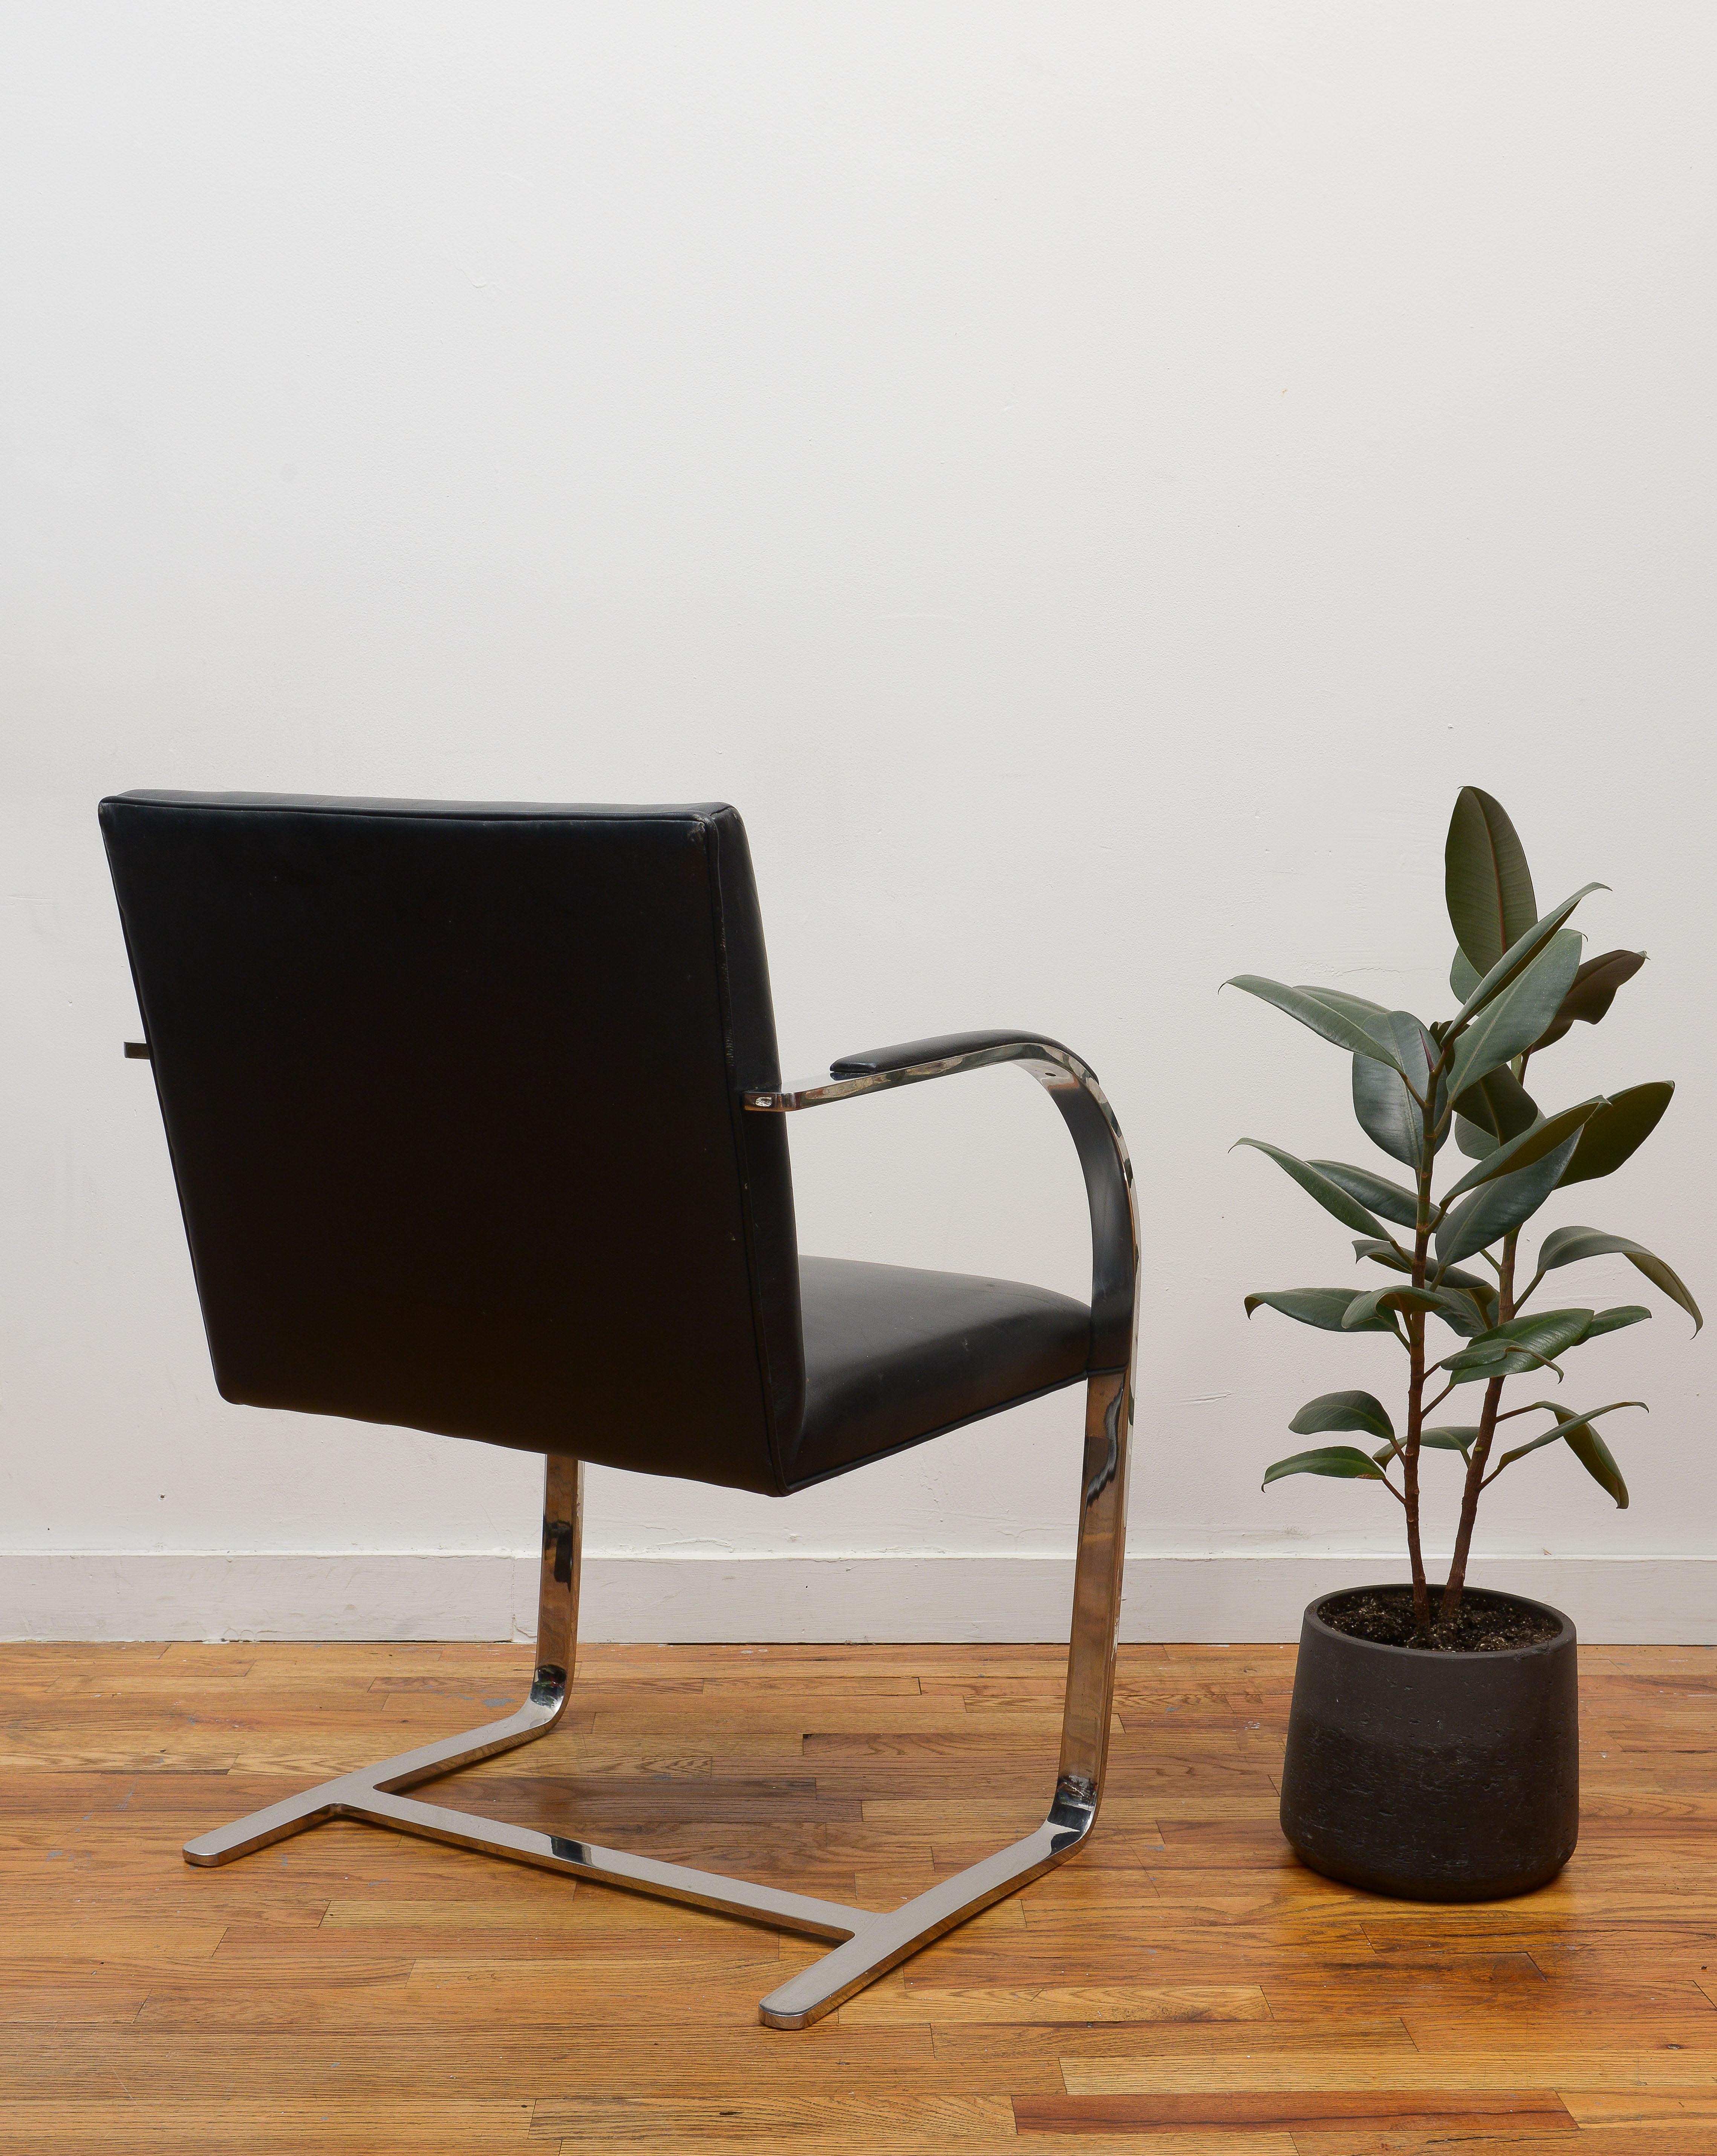 American Iconic Mies van der Rohe BRNO Flat Bar Chair in Black Leather, 1990s For Sale